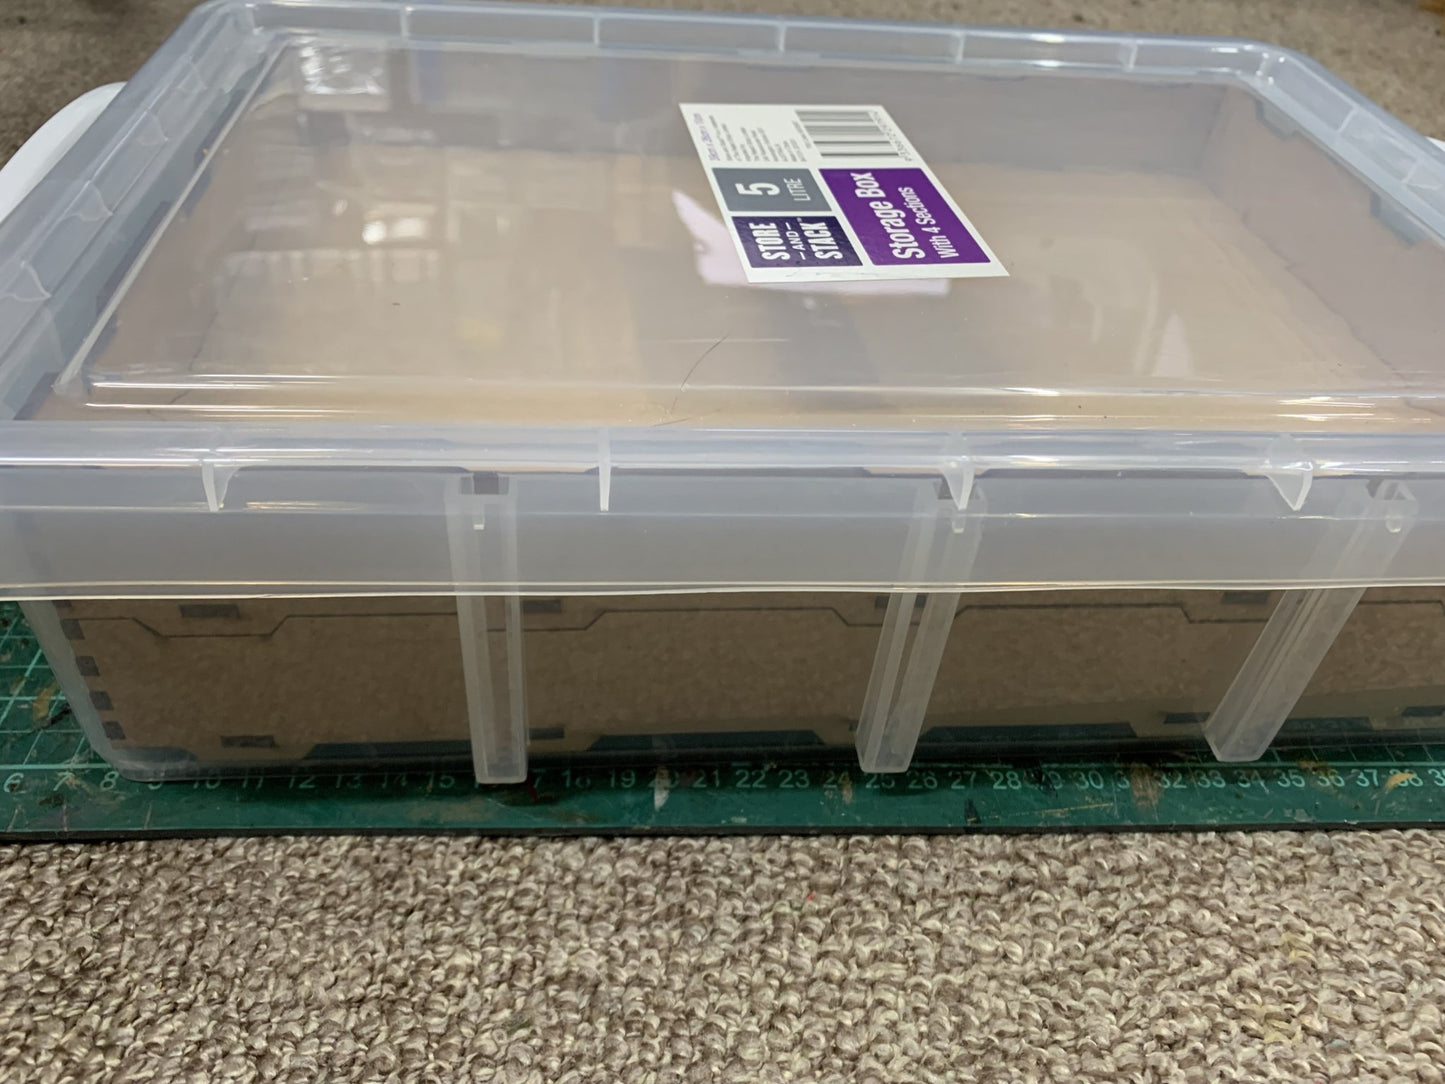 Store and Stack 5L Tray - Battlefield Accessories